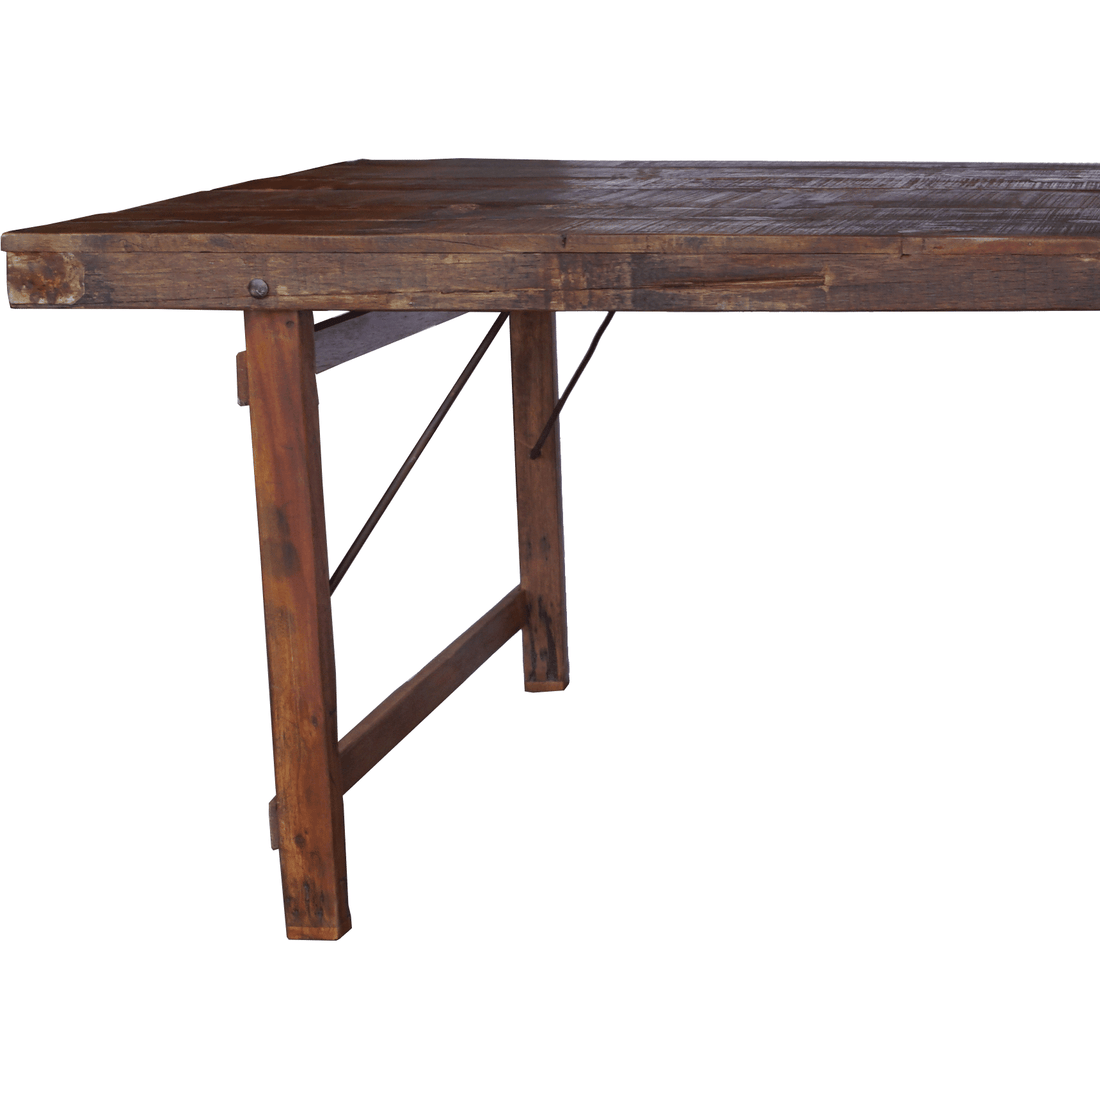 Trademark Living Kuta dining table in wood with beautiful patina